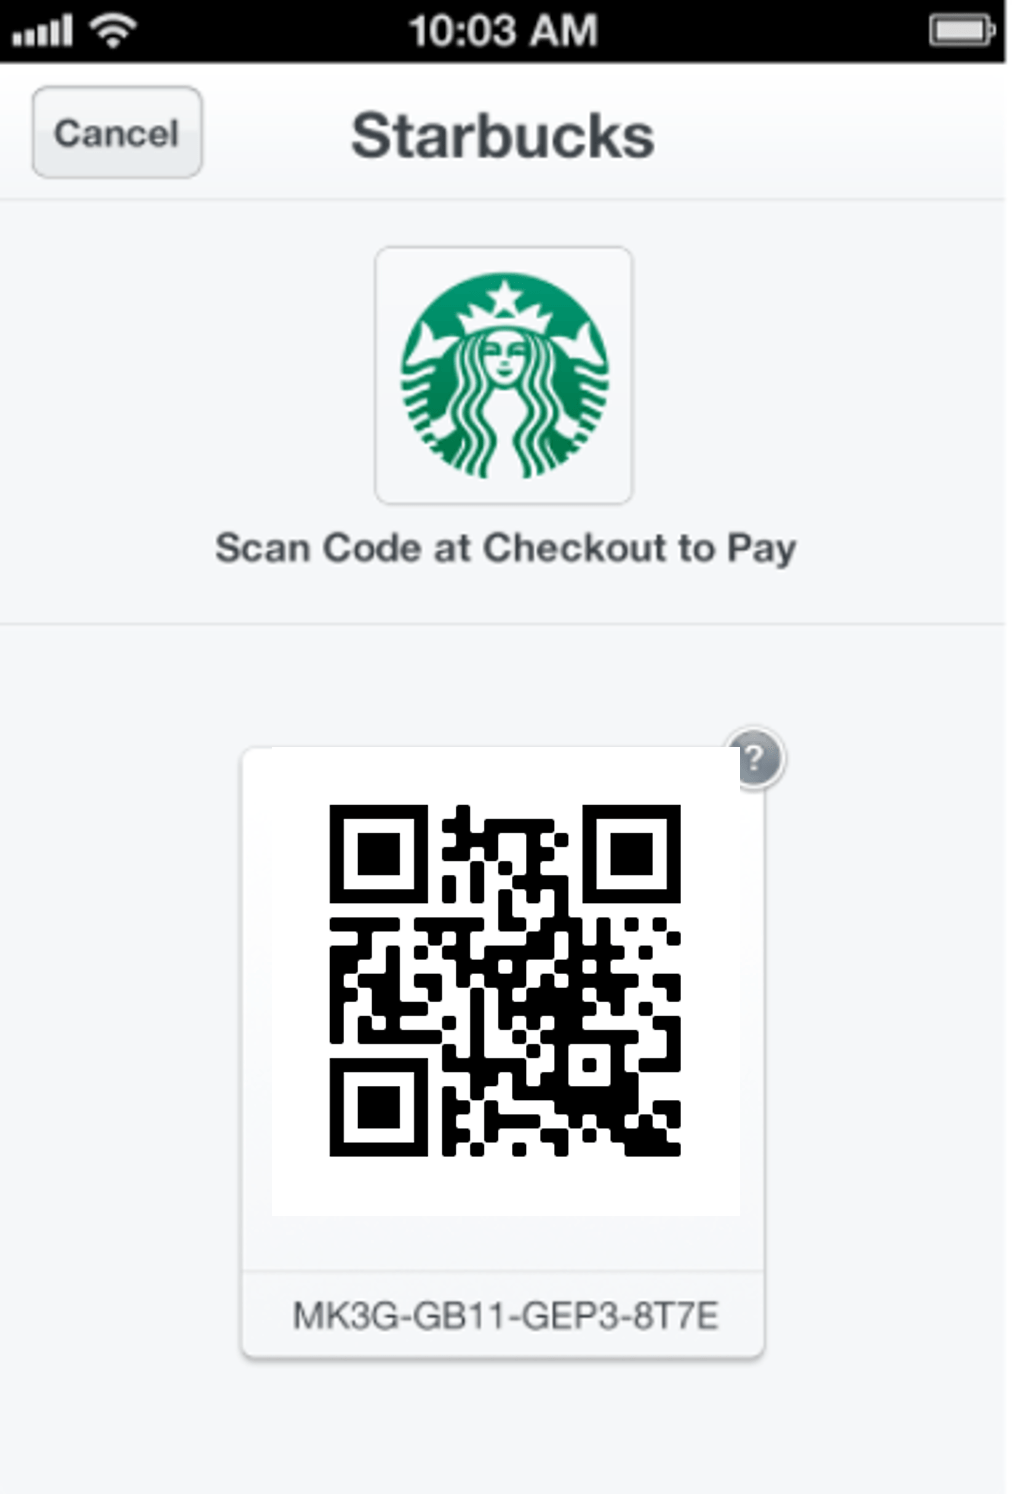 starbucks security code scratched off